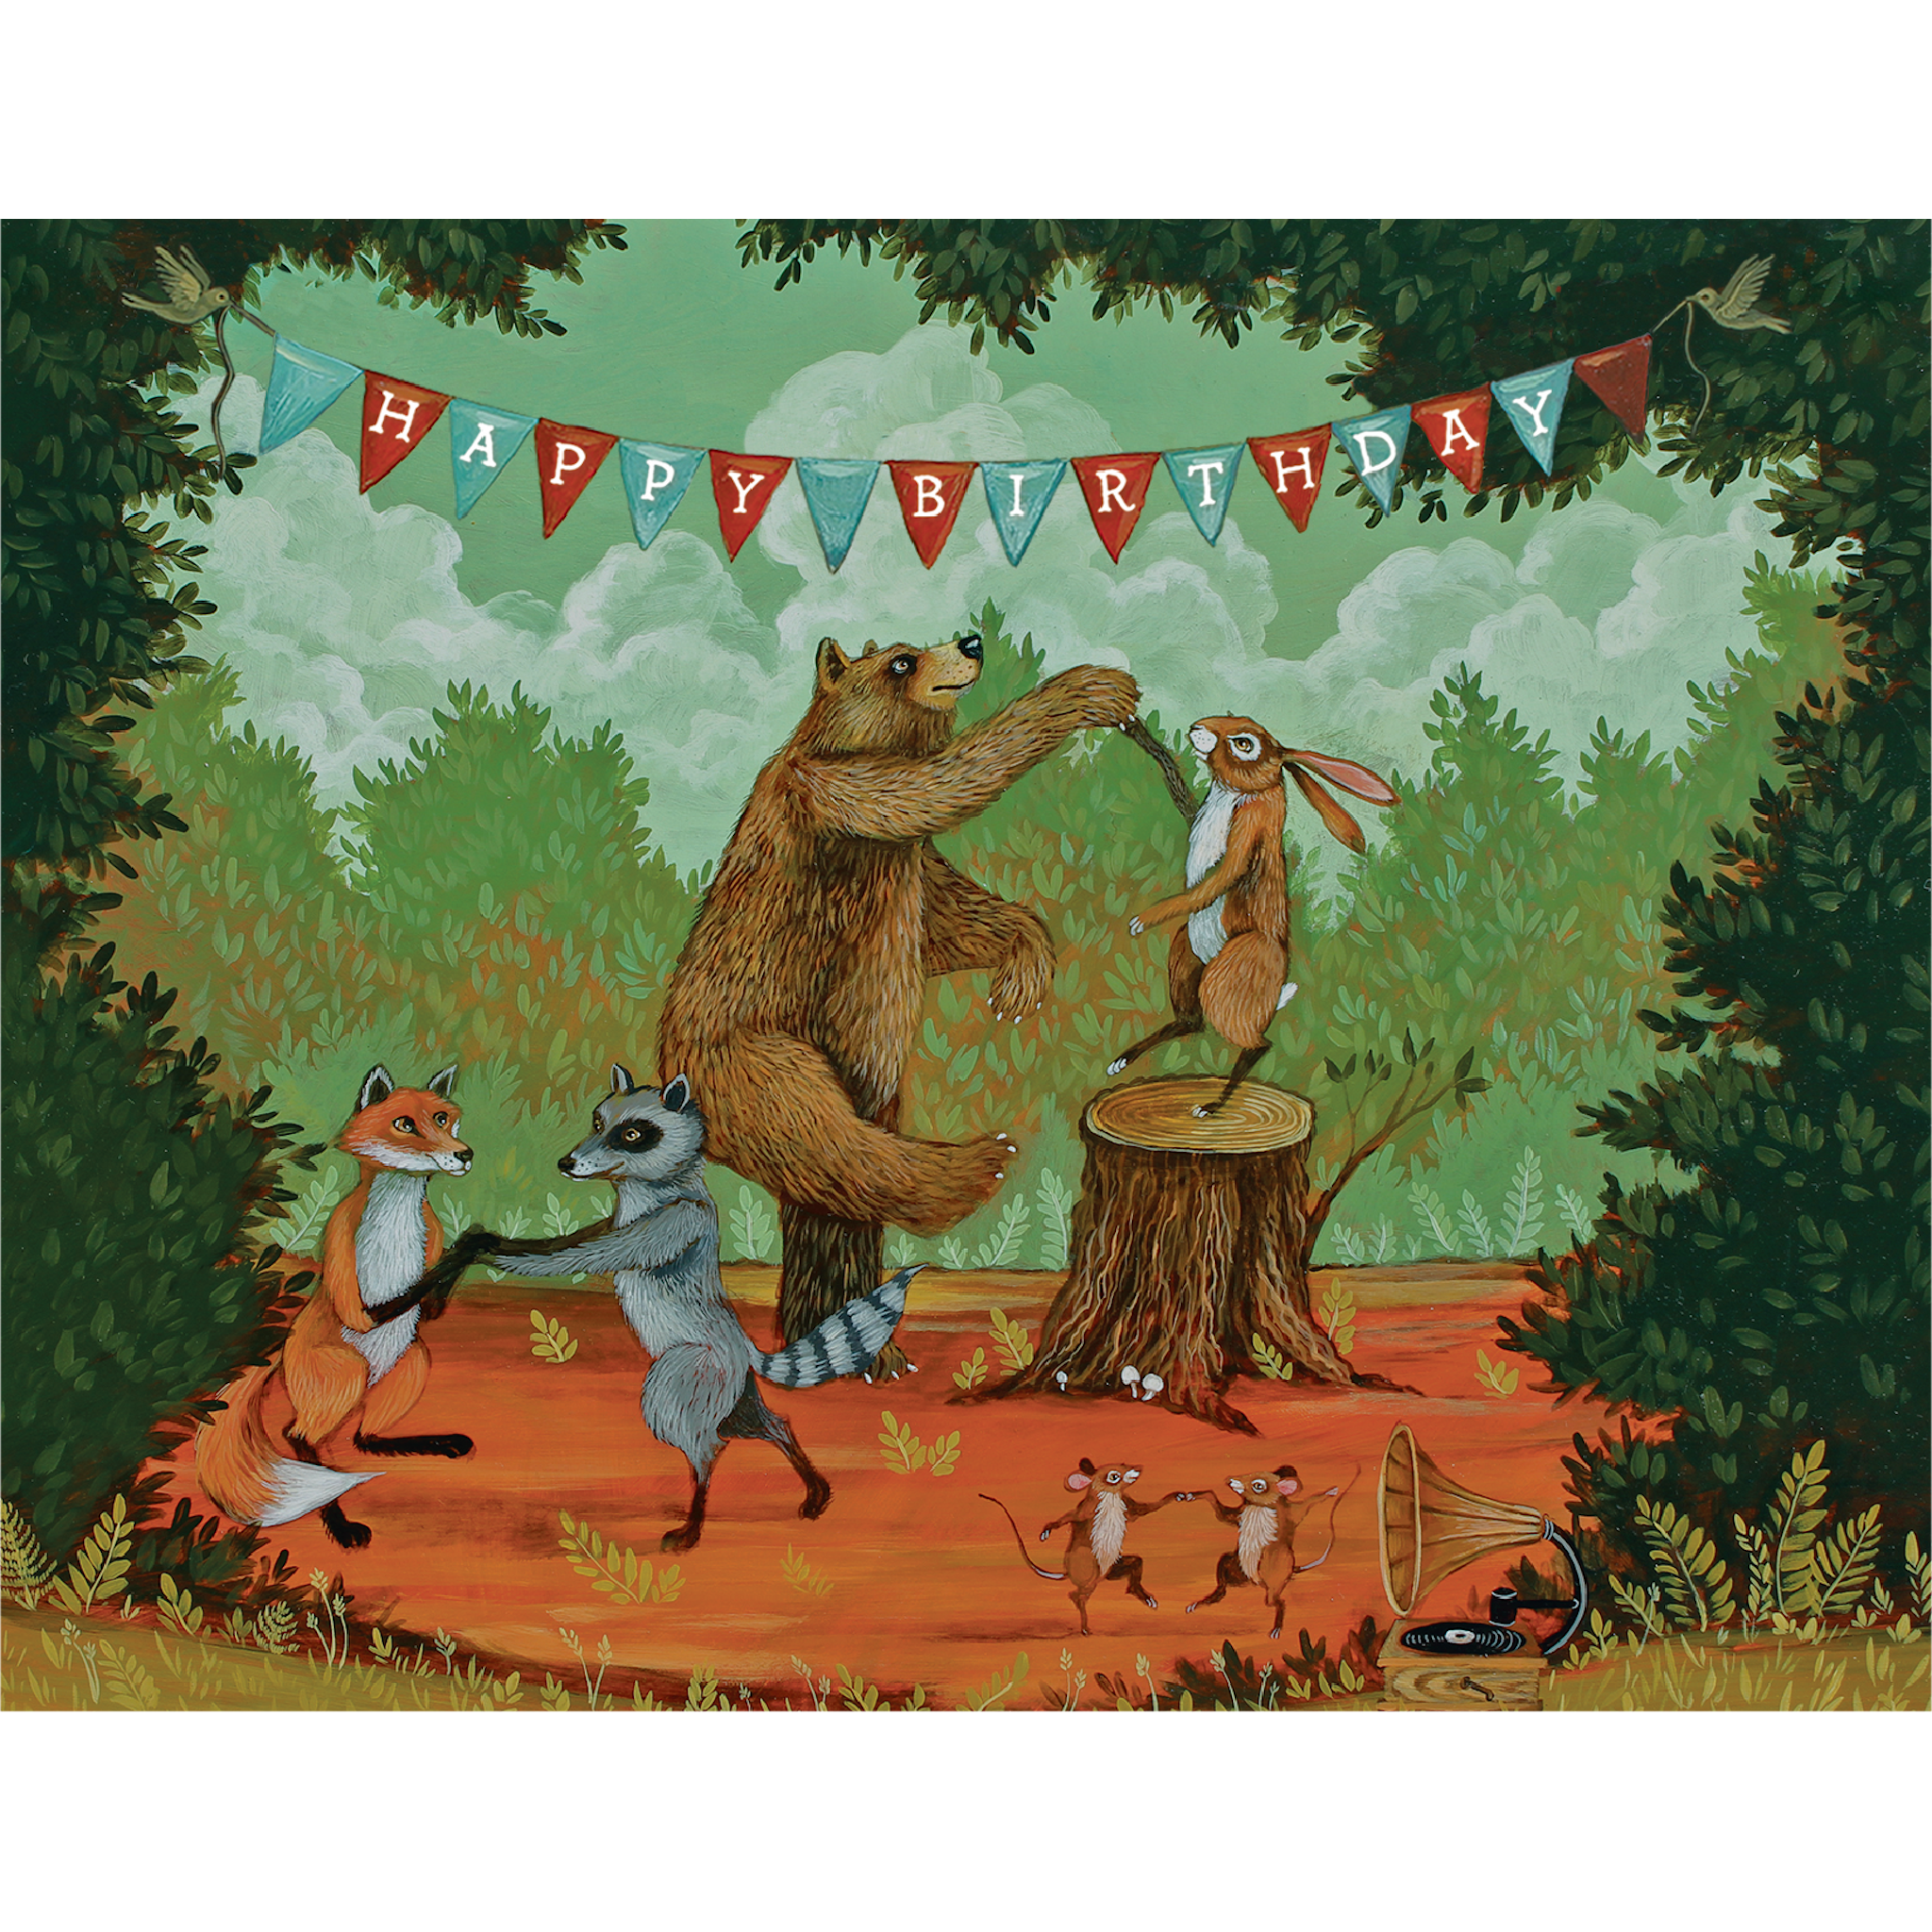 A captivating Happy Birthday Party Card capturing the joyful essence of a Happy Birthday celebration, with animals dancing amidst colorful bunting by Hester &amp; Cook.